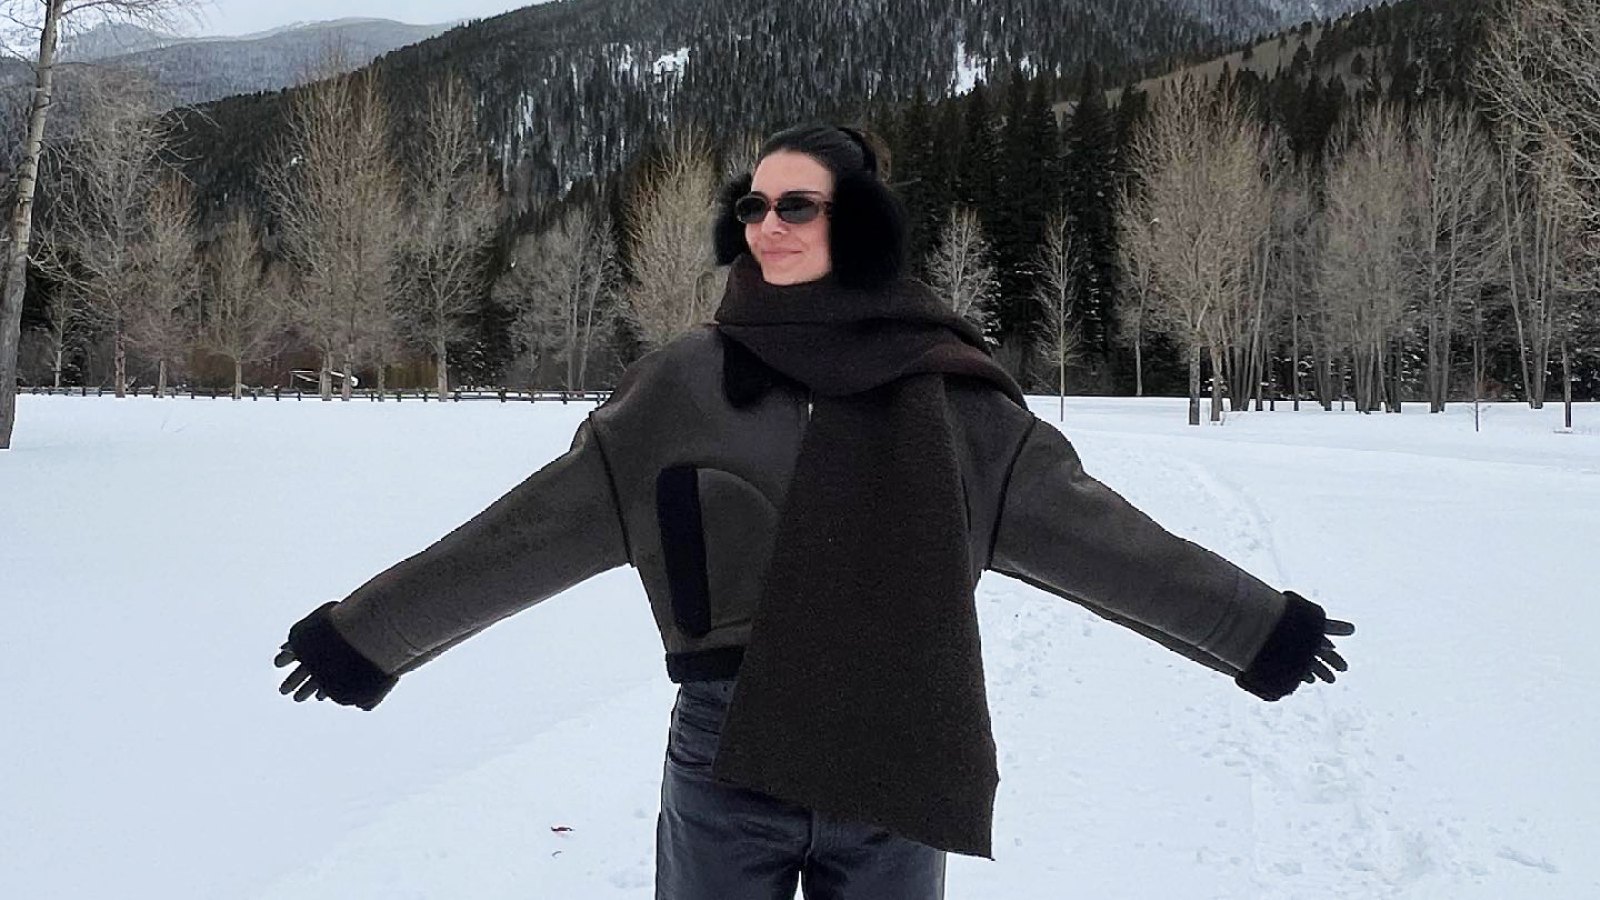 Kendall Jenner Looks Chic While Riding a Horse Through the Snow